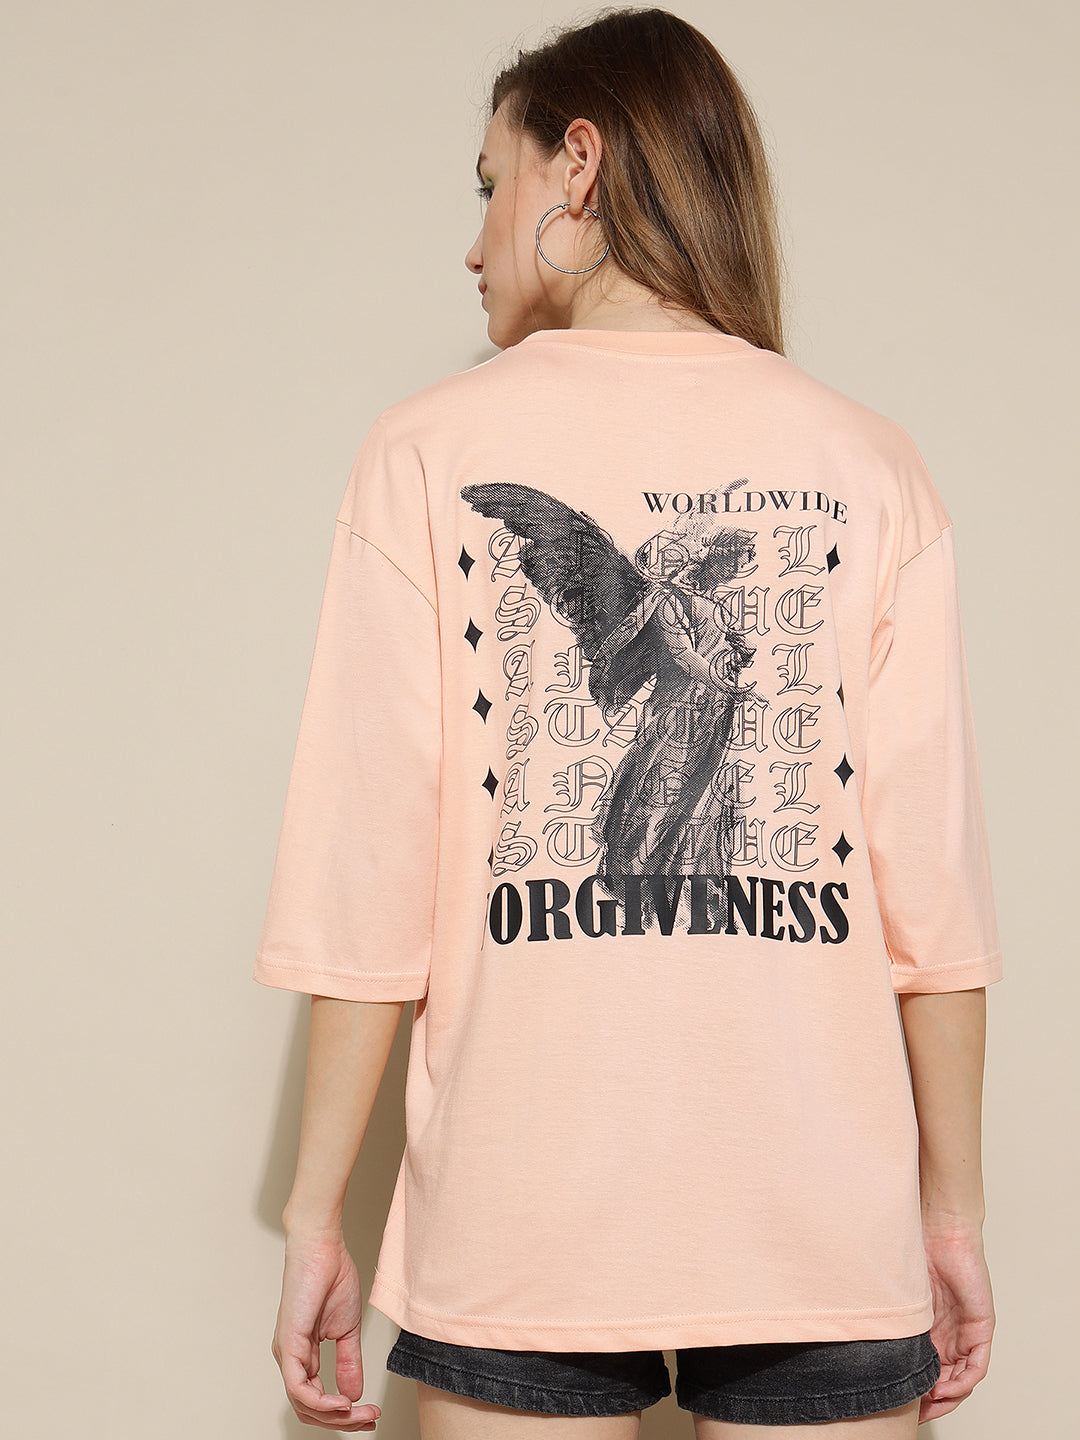 Forgiveness Peach Oversized Both Side Printed Tee for Women